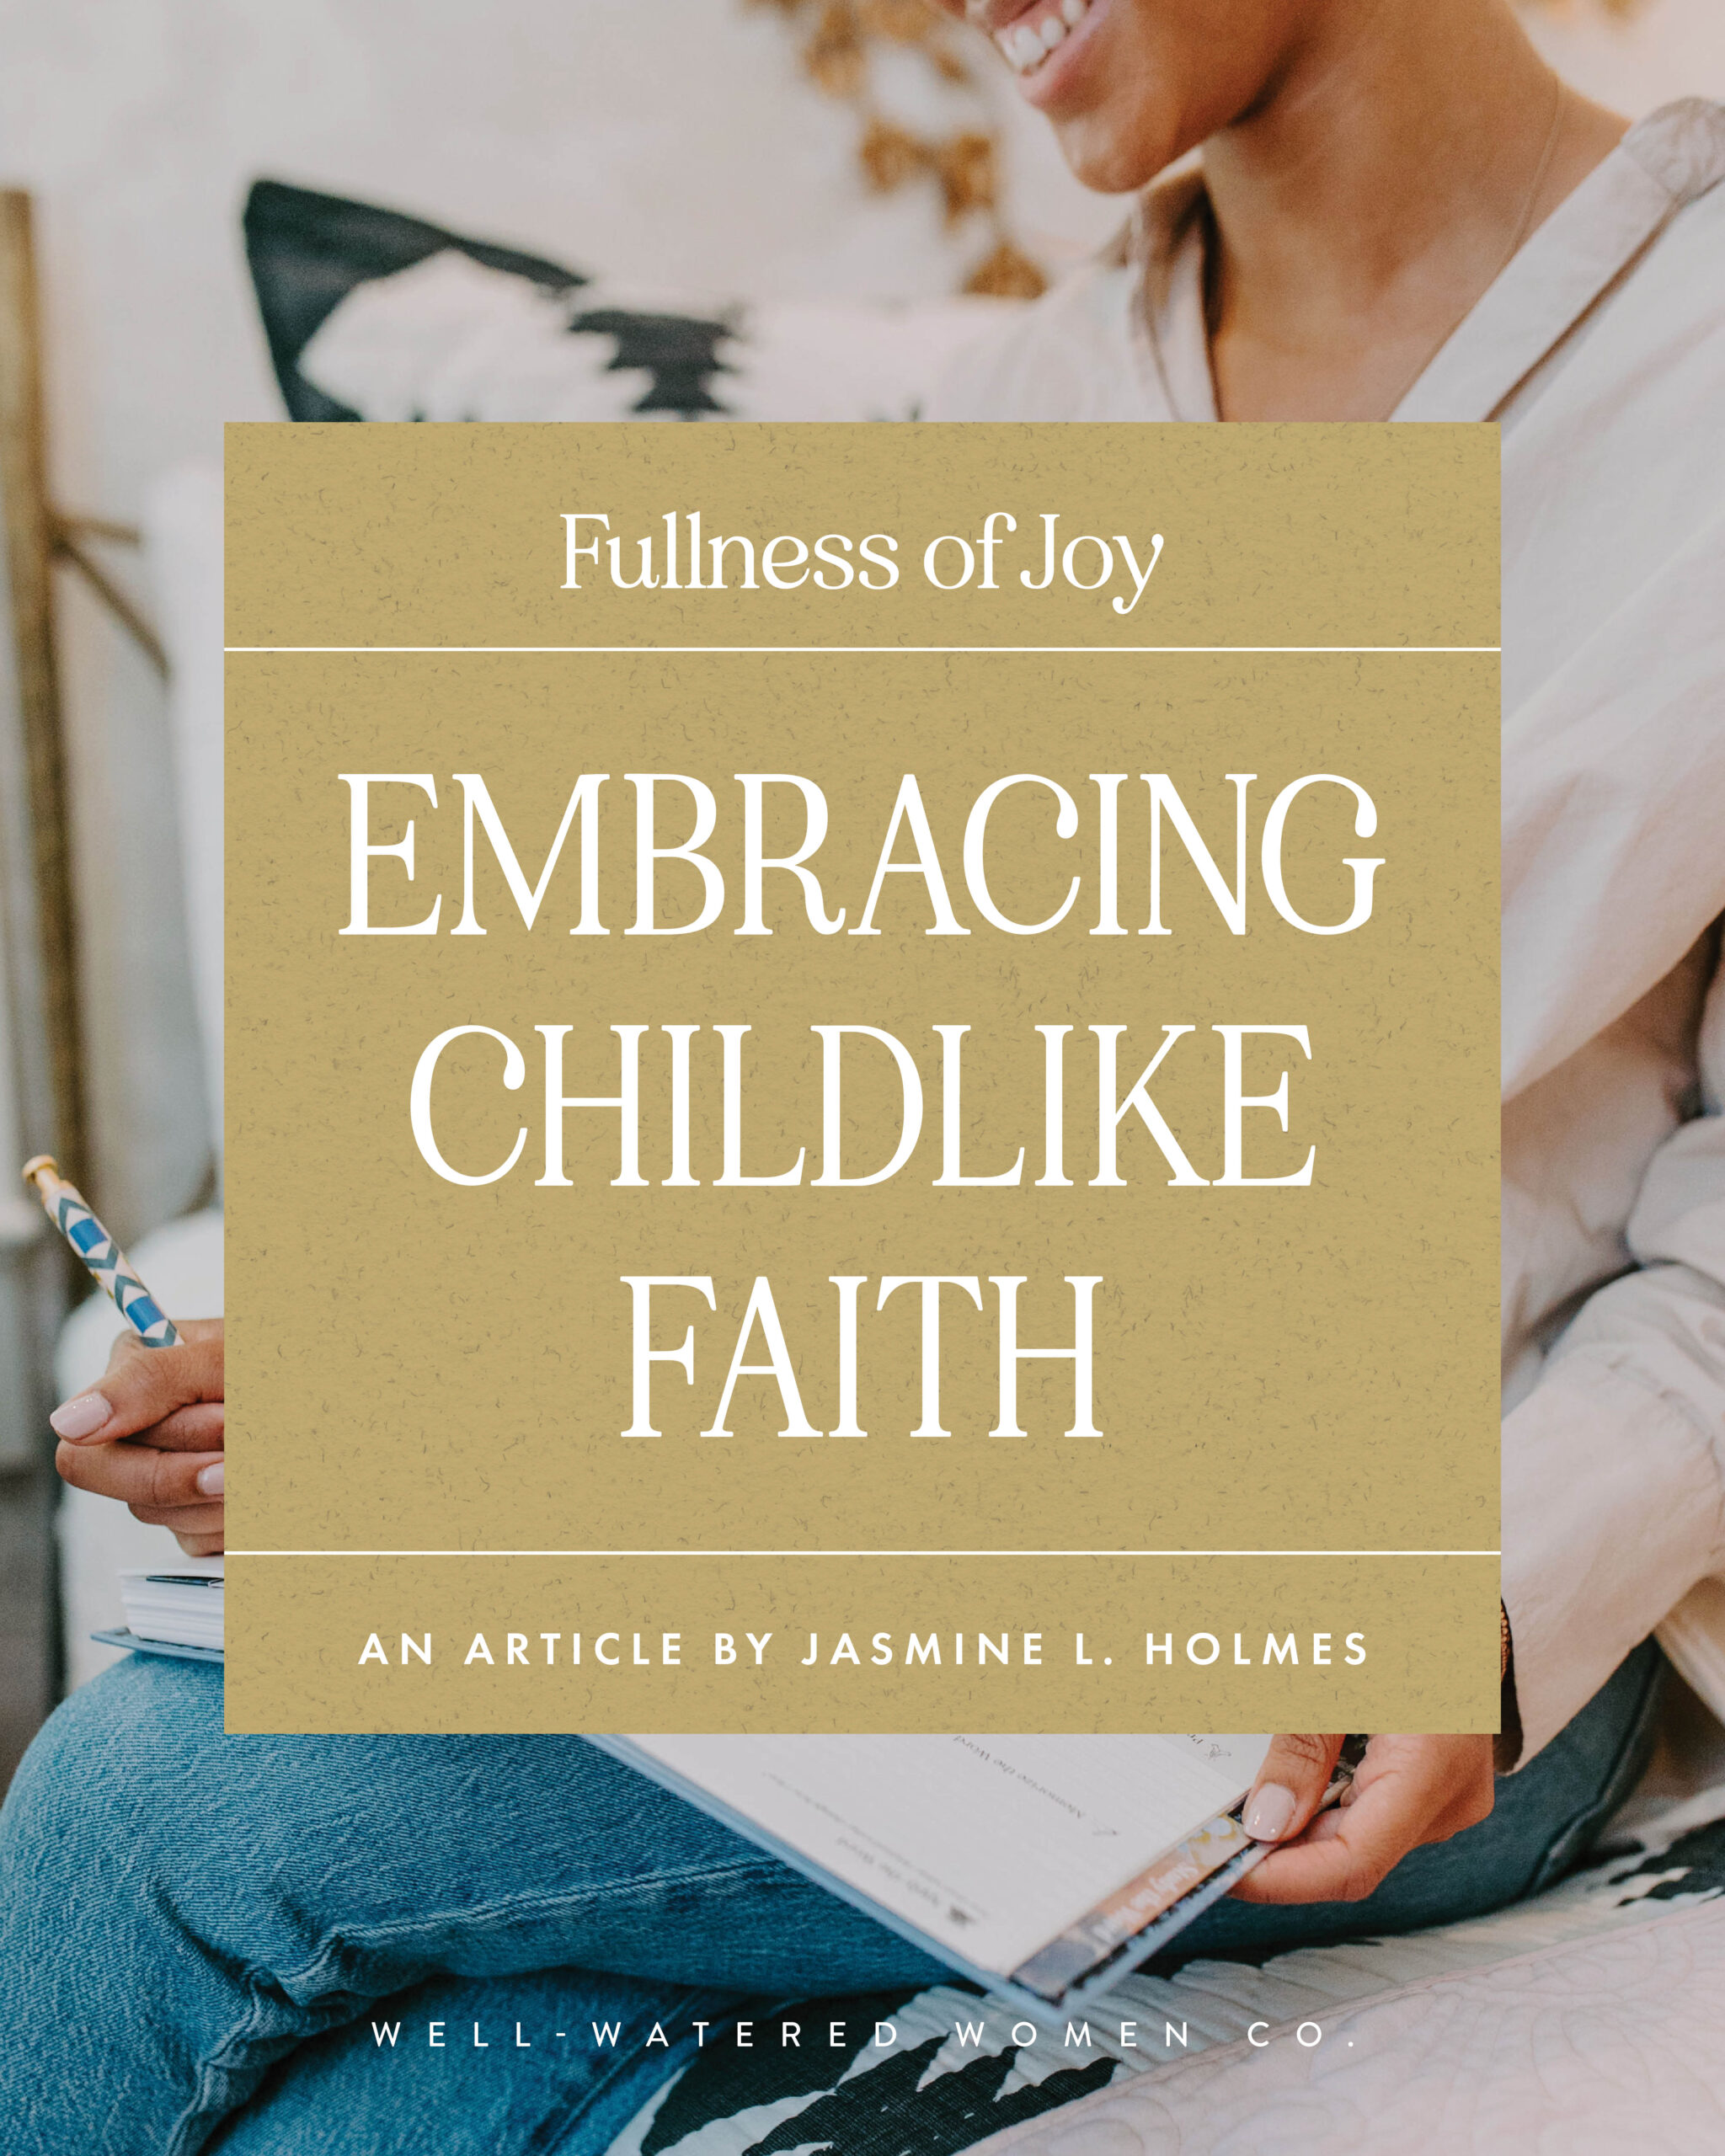 Embracing Childlike Faith - an article from Well-Watered Women